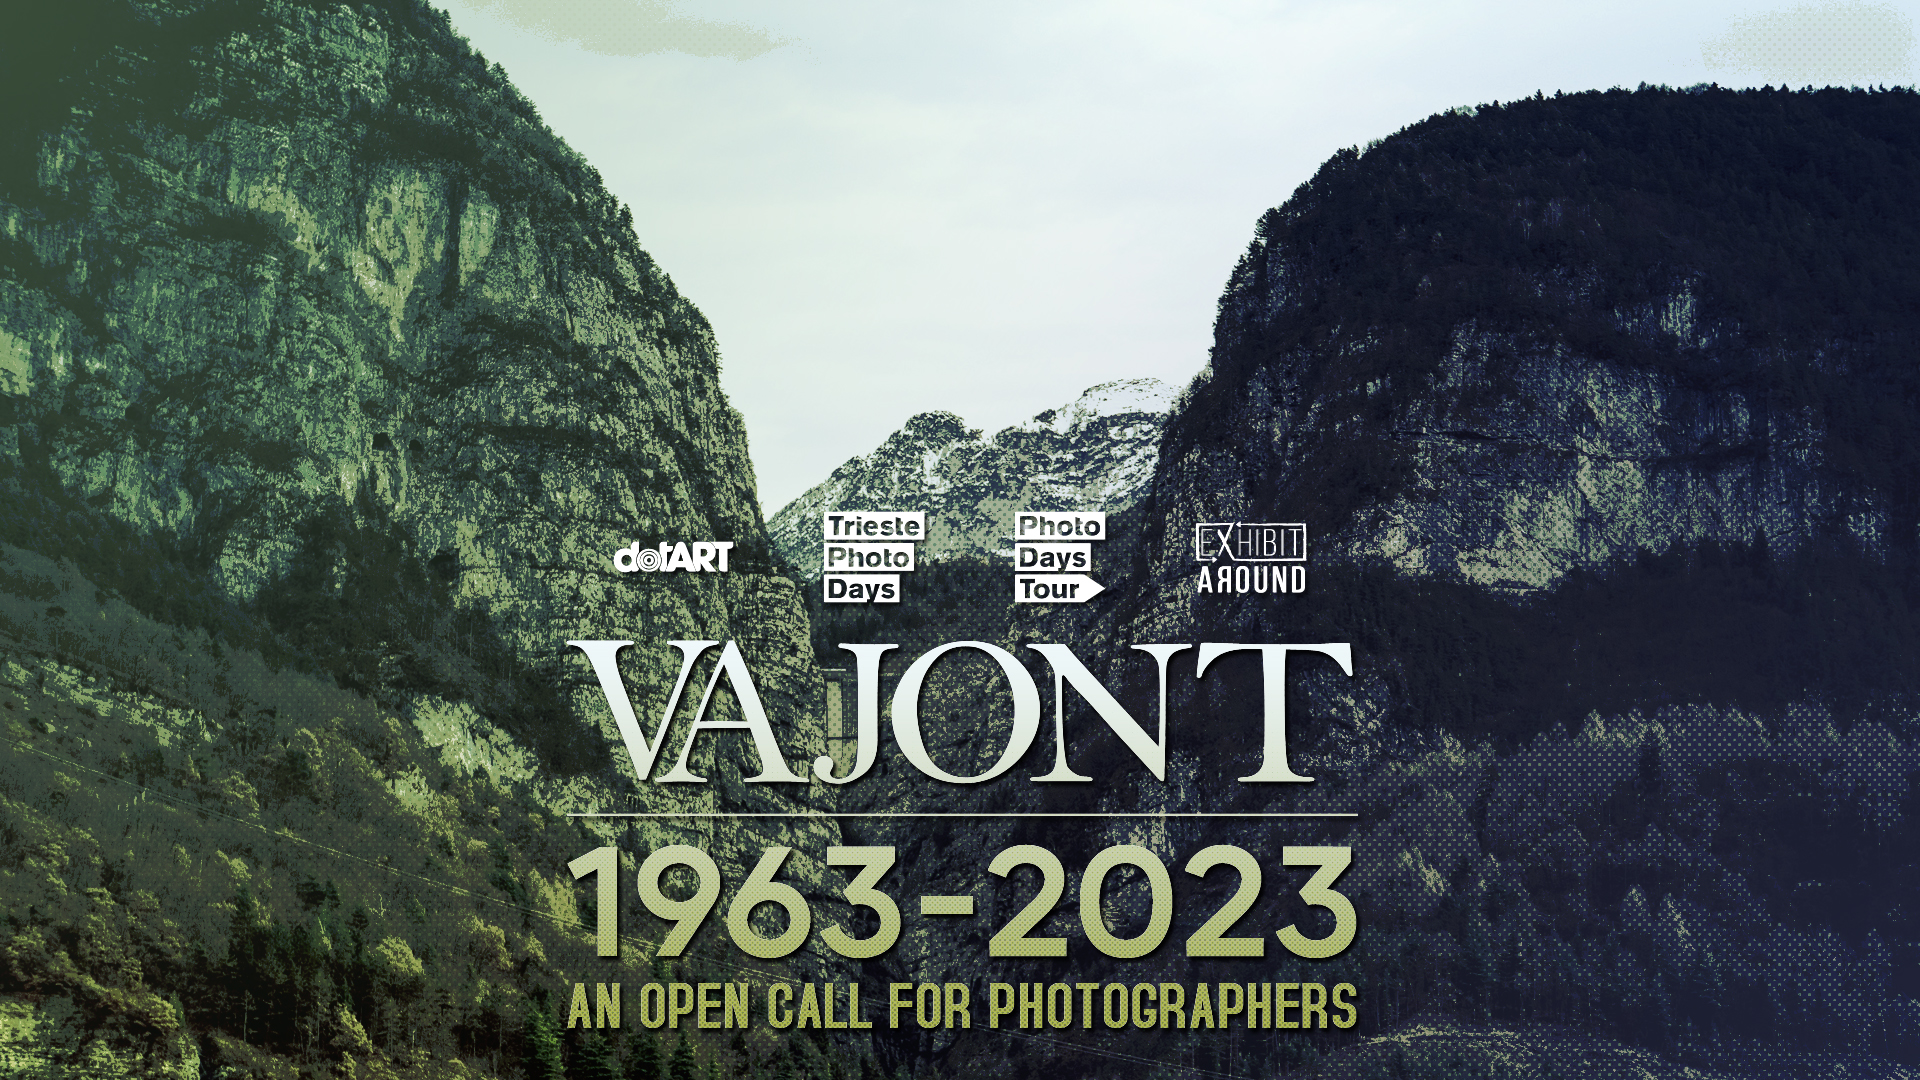 Photography open call dedicated to Vajont disaster